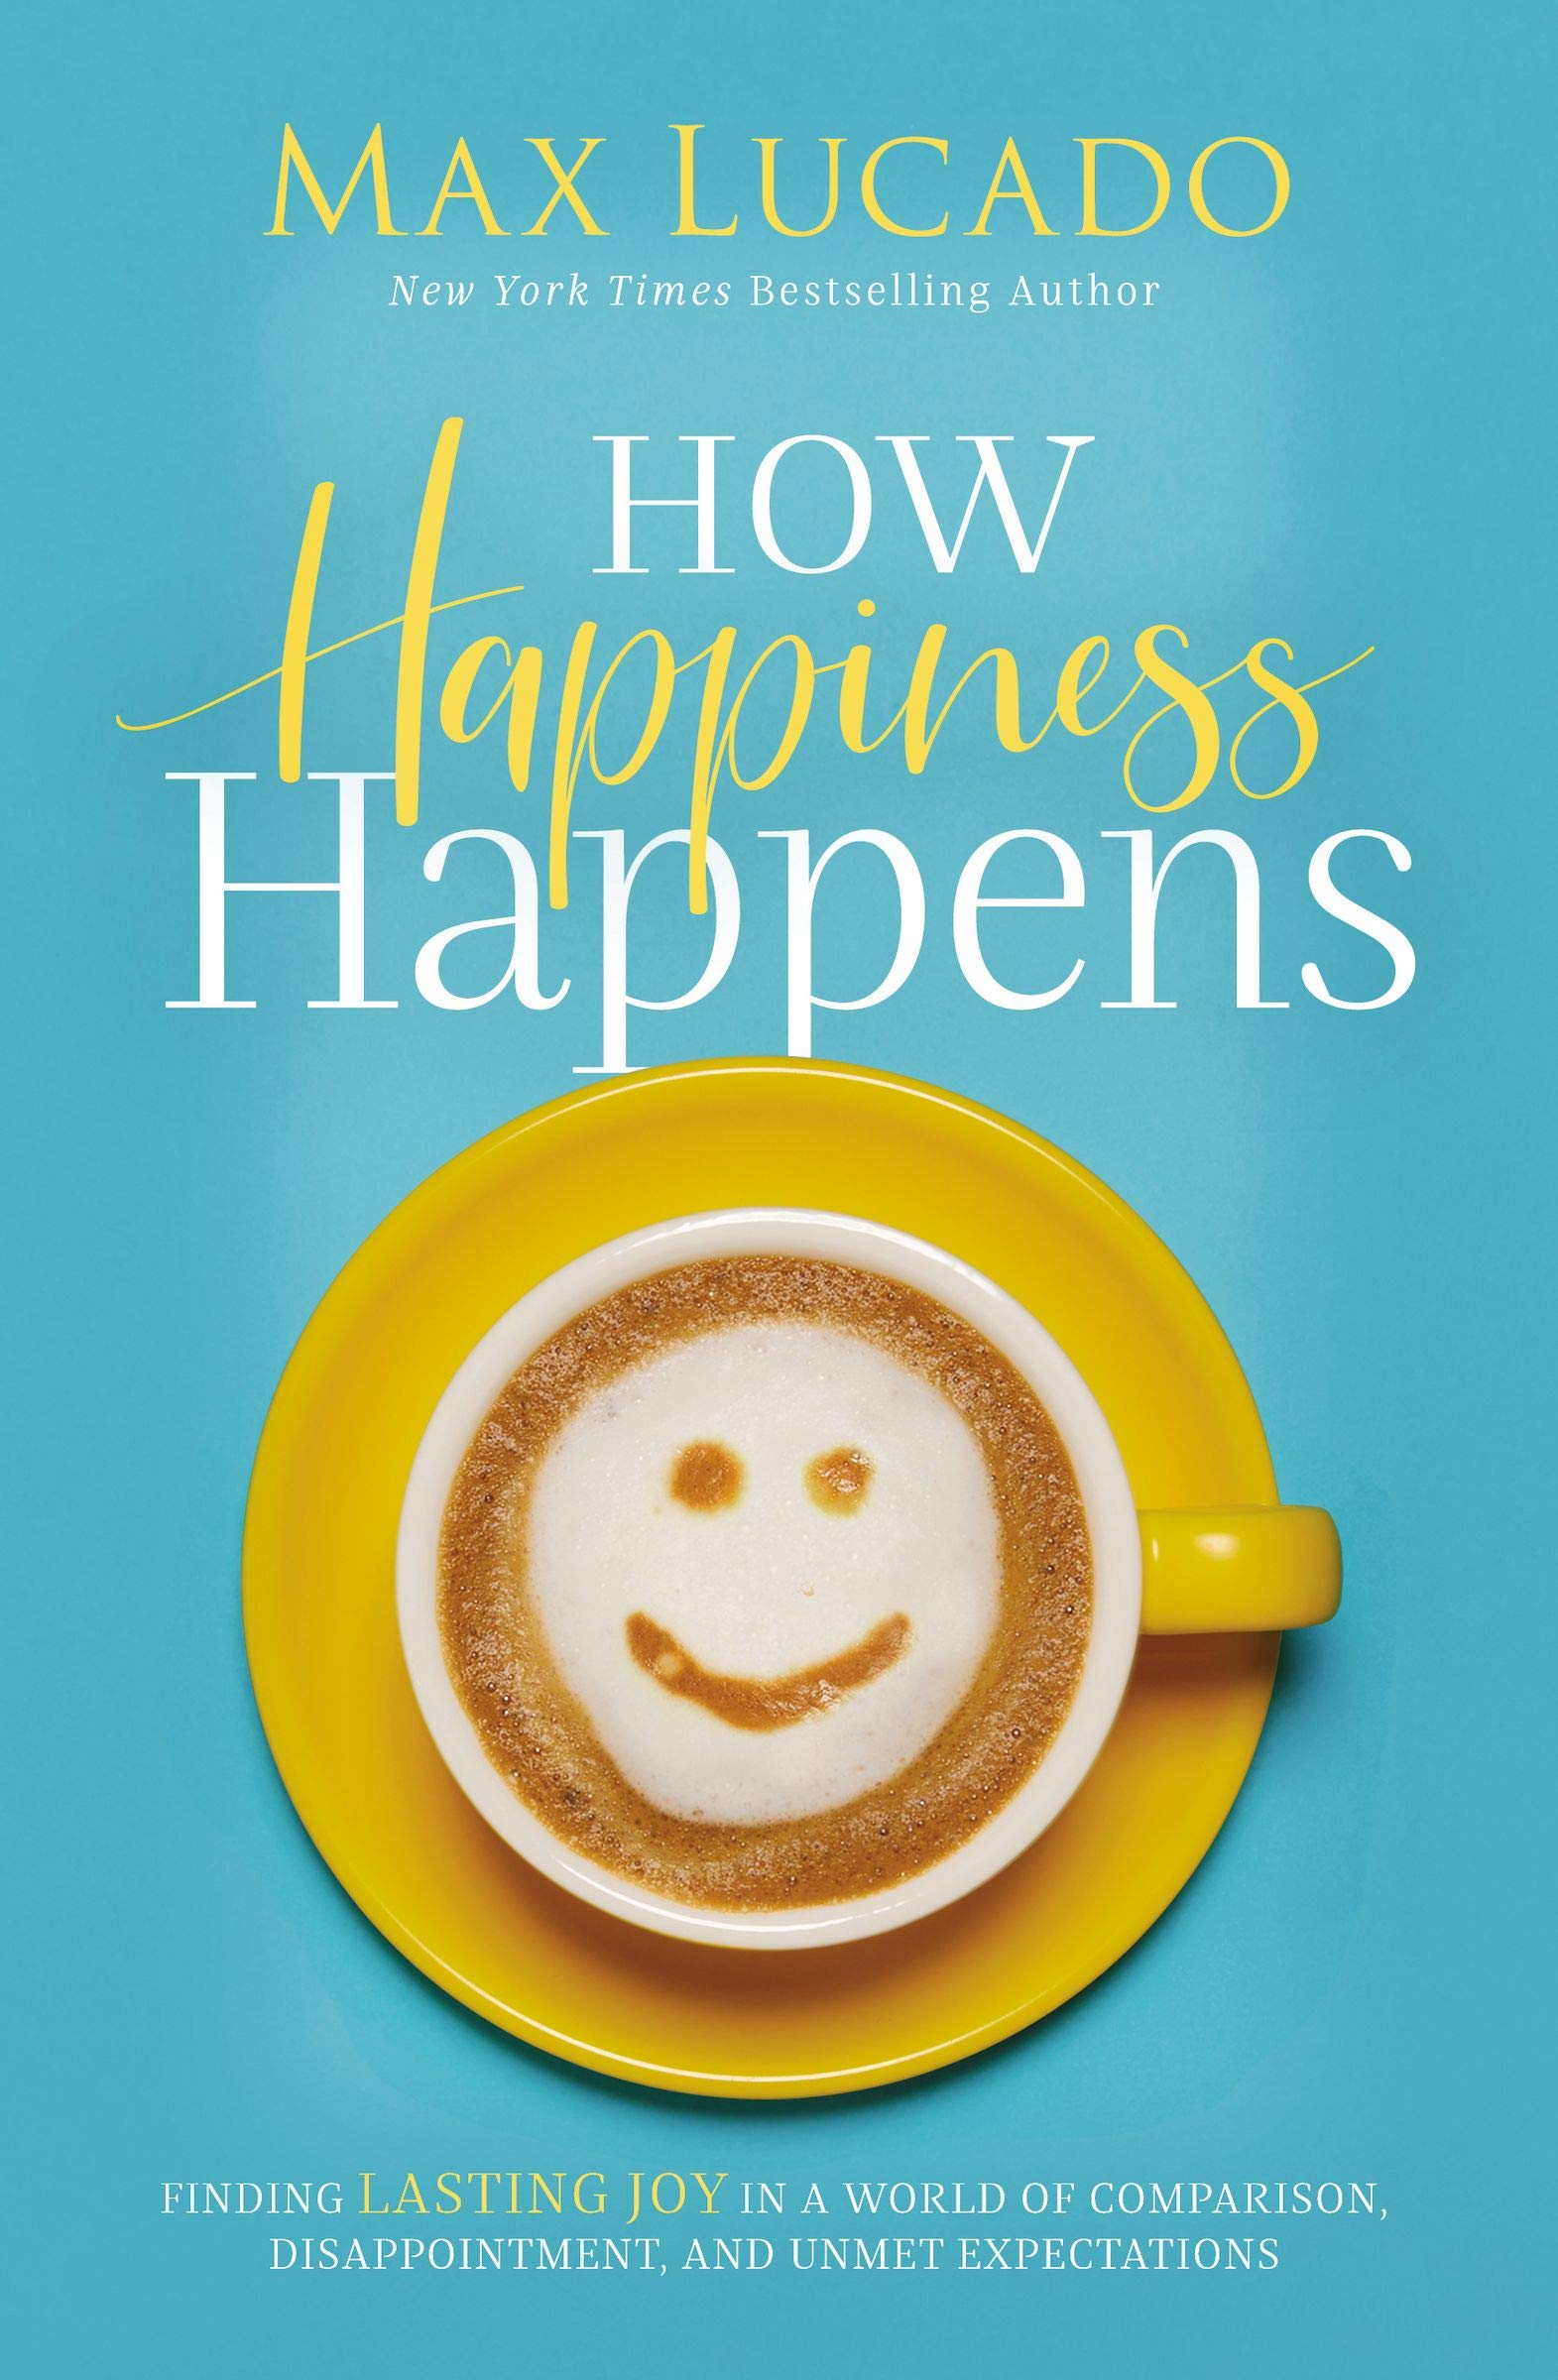 More information on How Happiness Happens